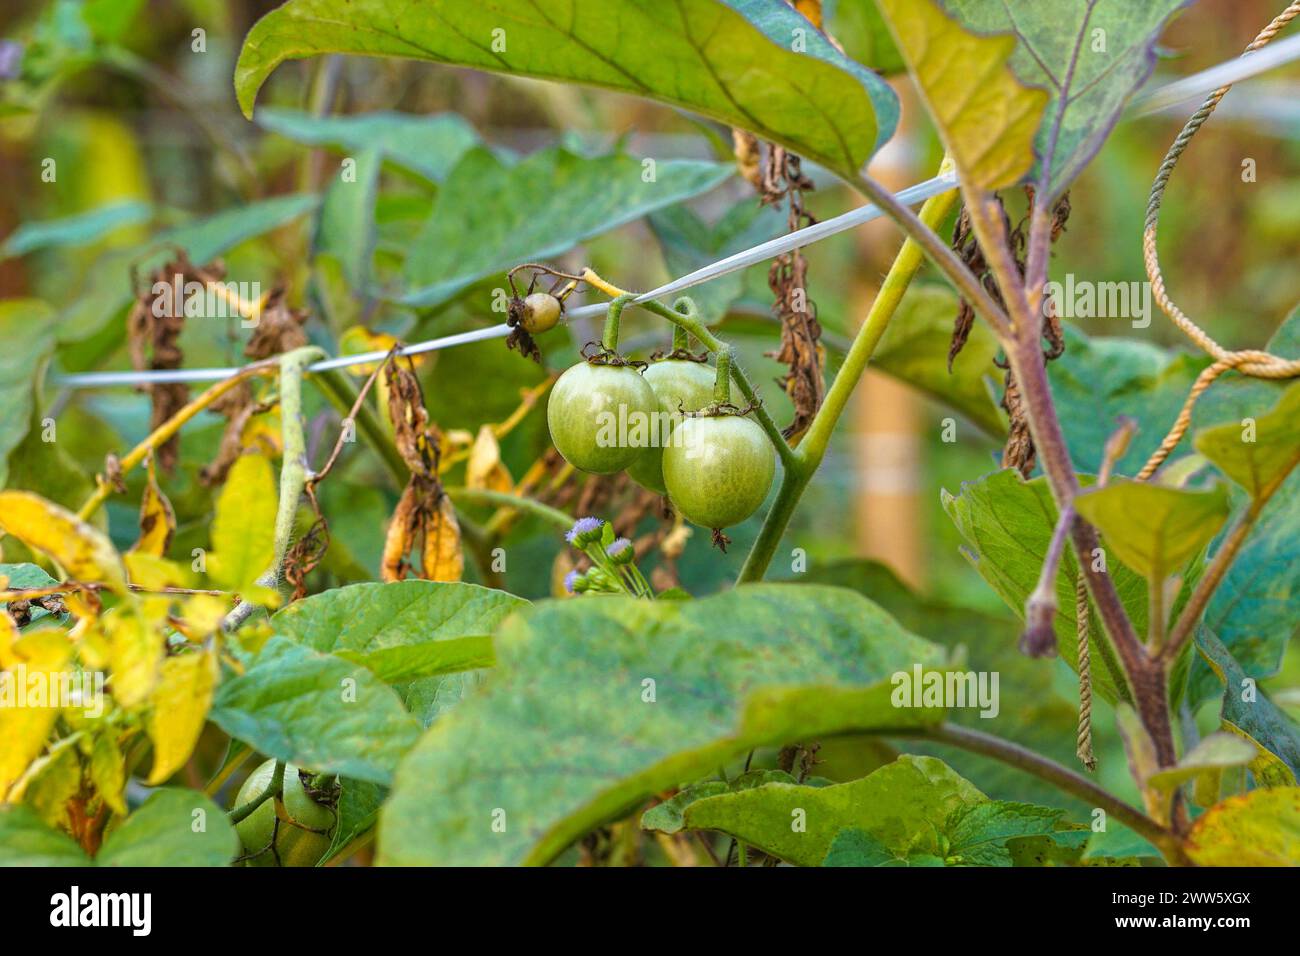 Tomato field with raw tomatoes, Green tomatoes hanging on it's tree Stock Photo